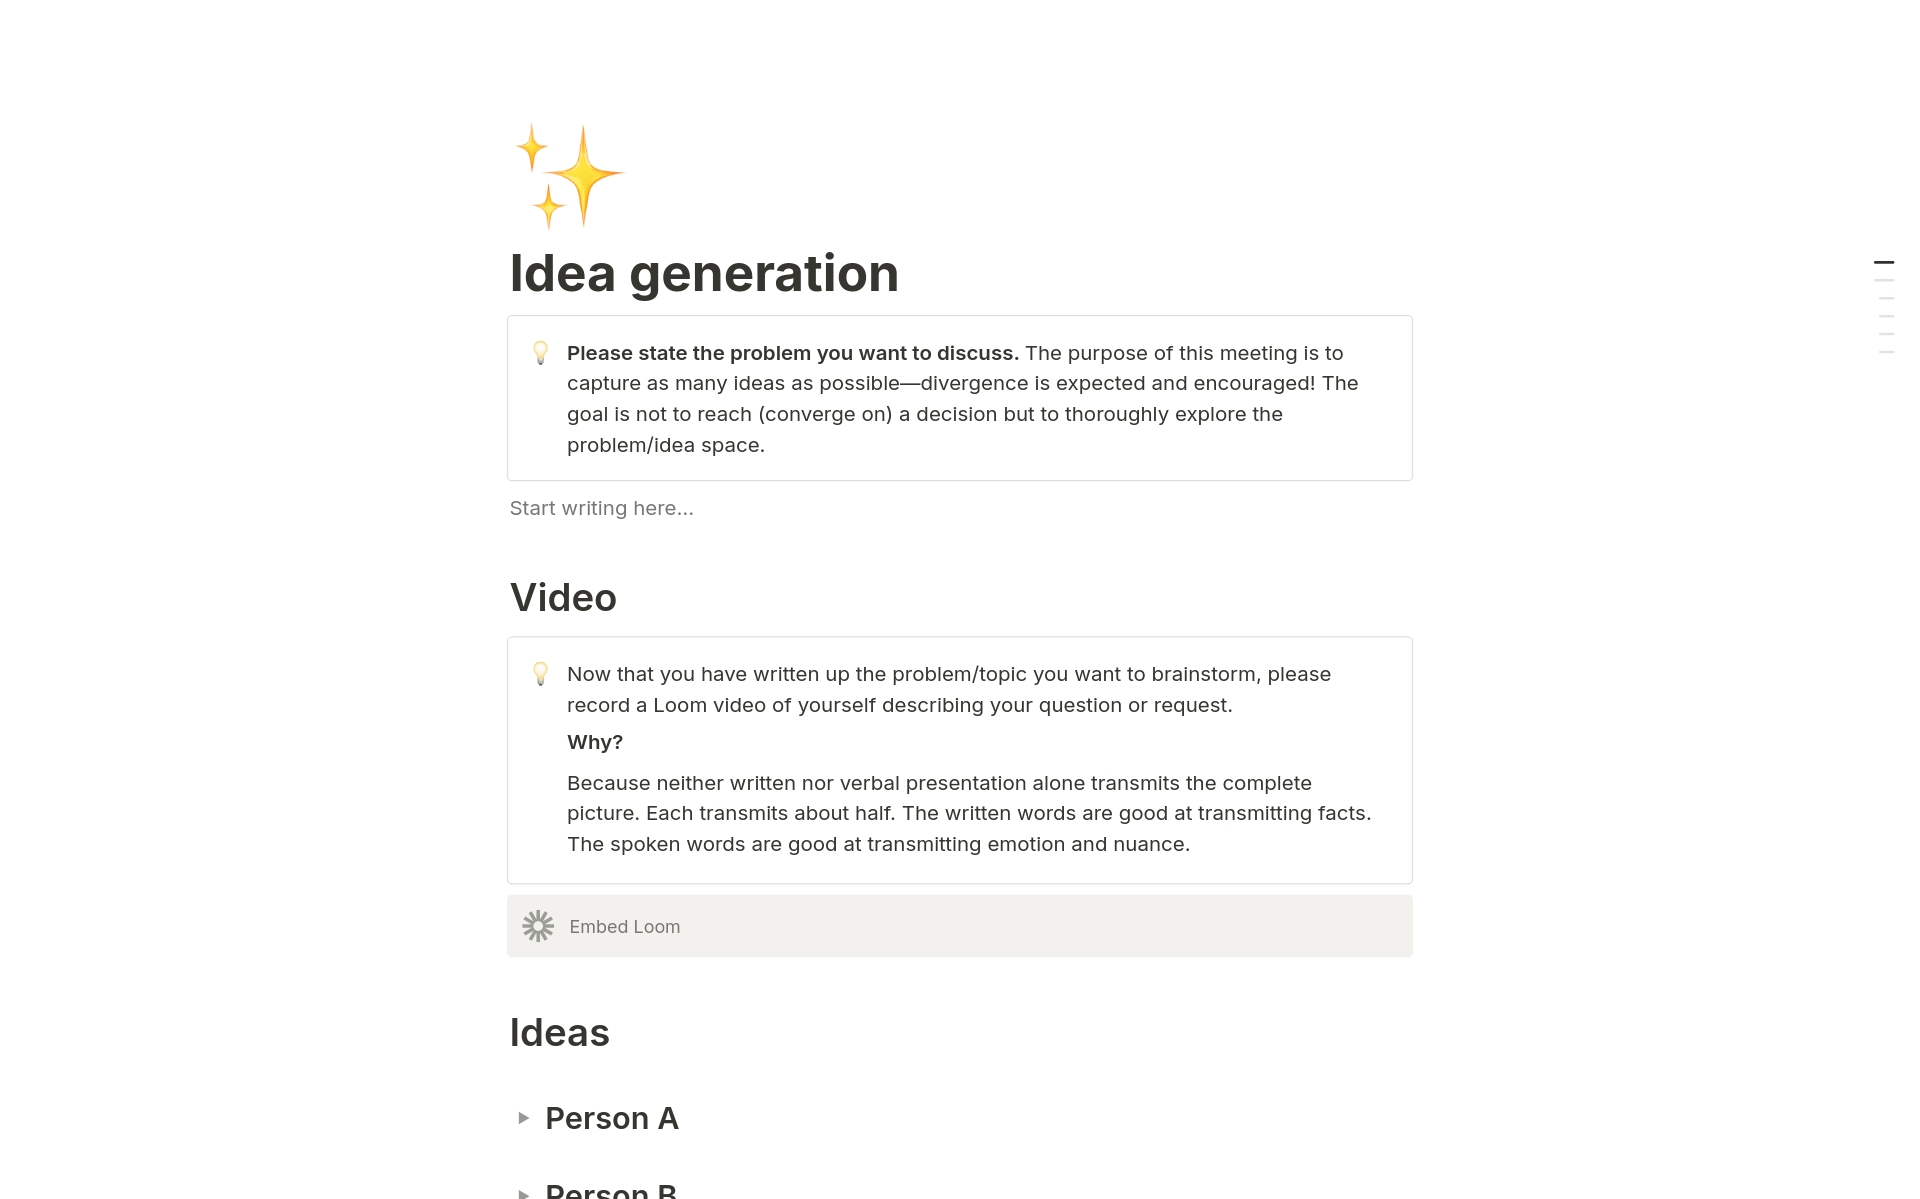 How Plane approaches idea generation.